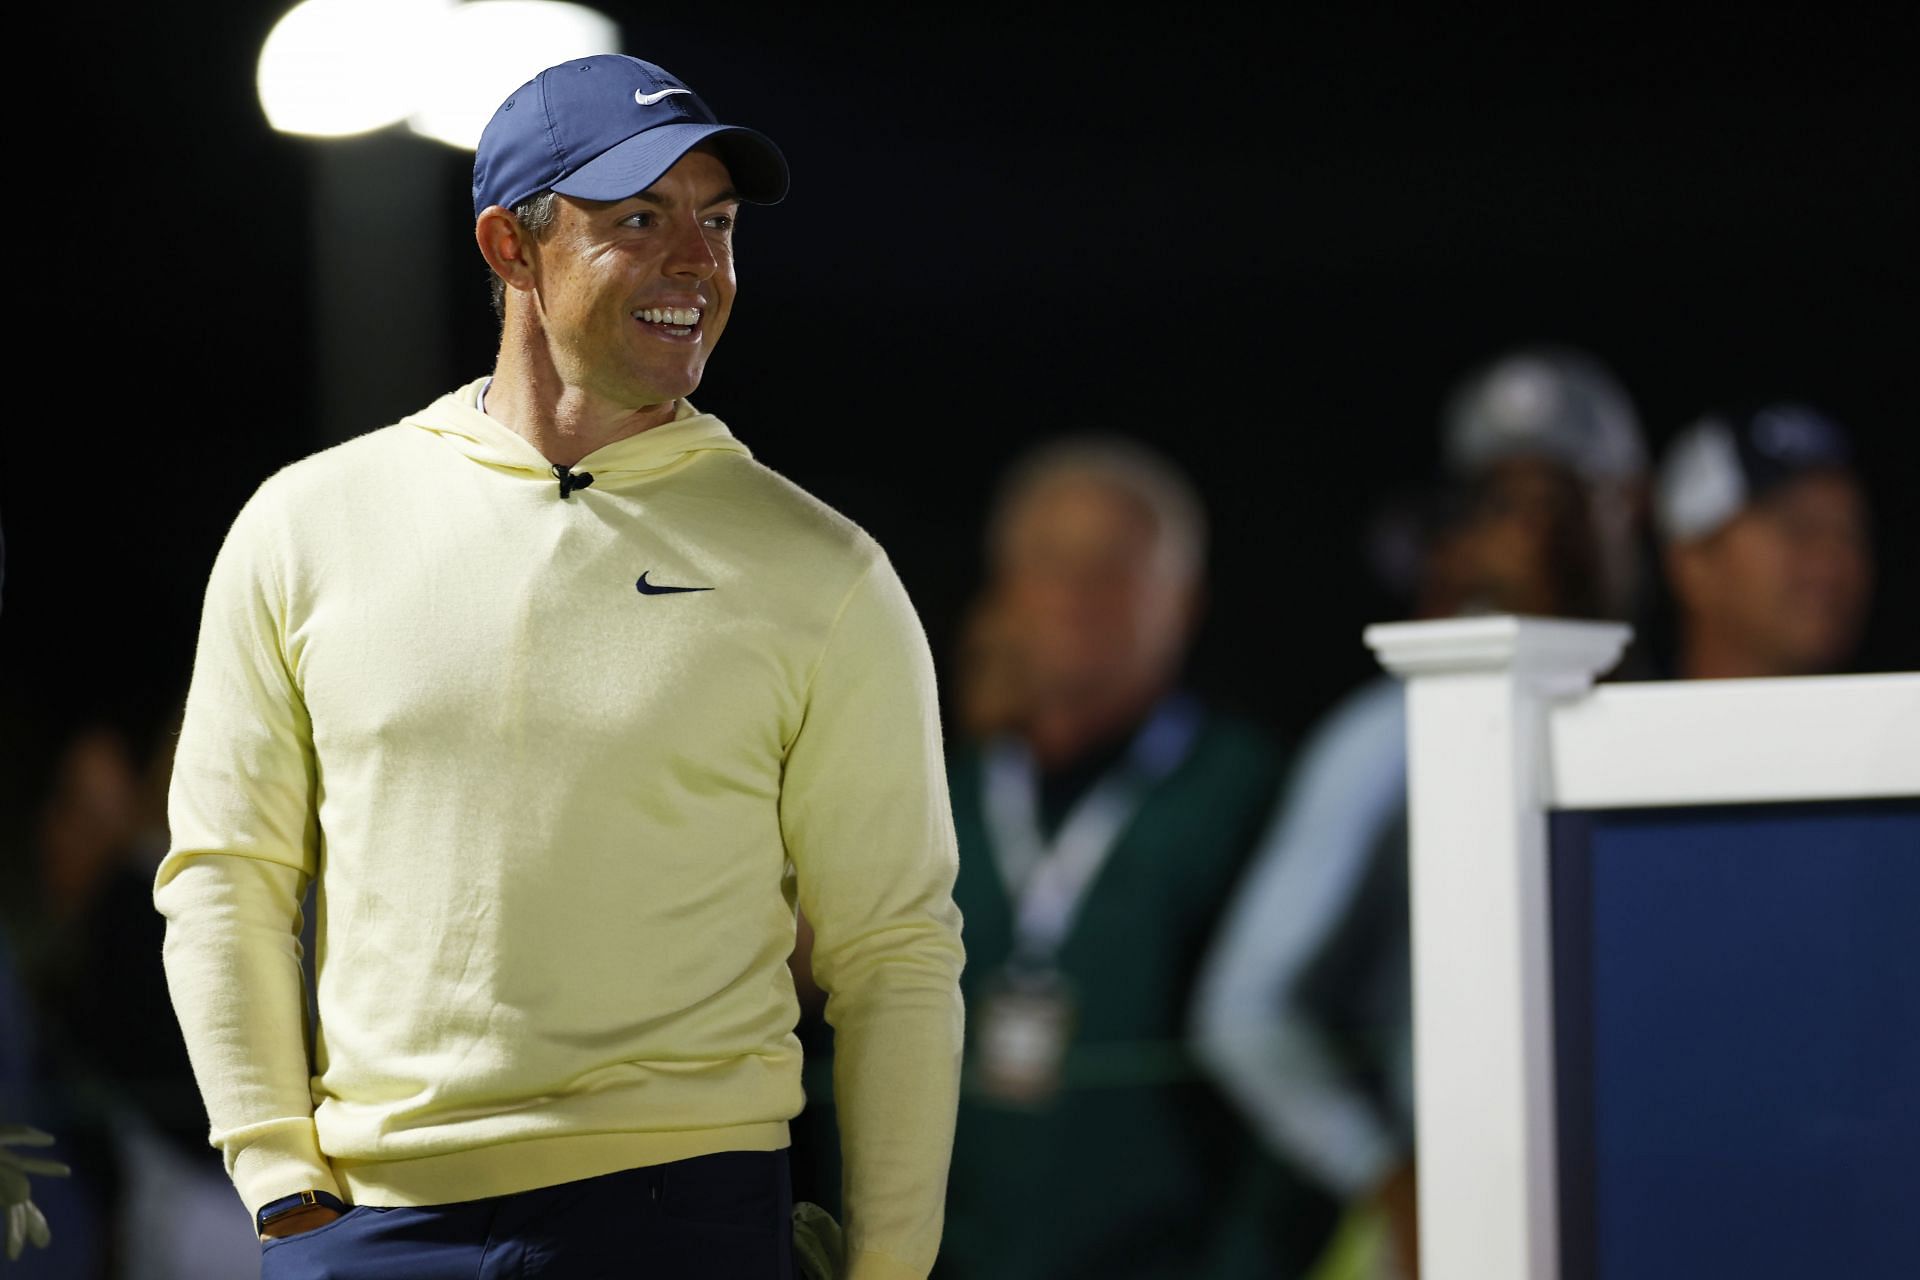 Rory McIlroy got called out by Talor Gooch